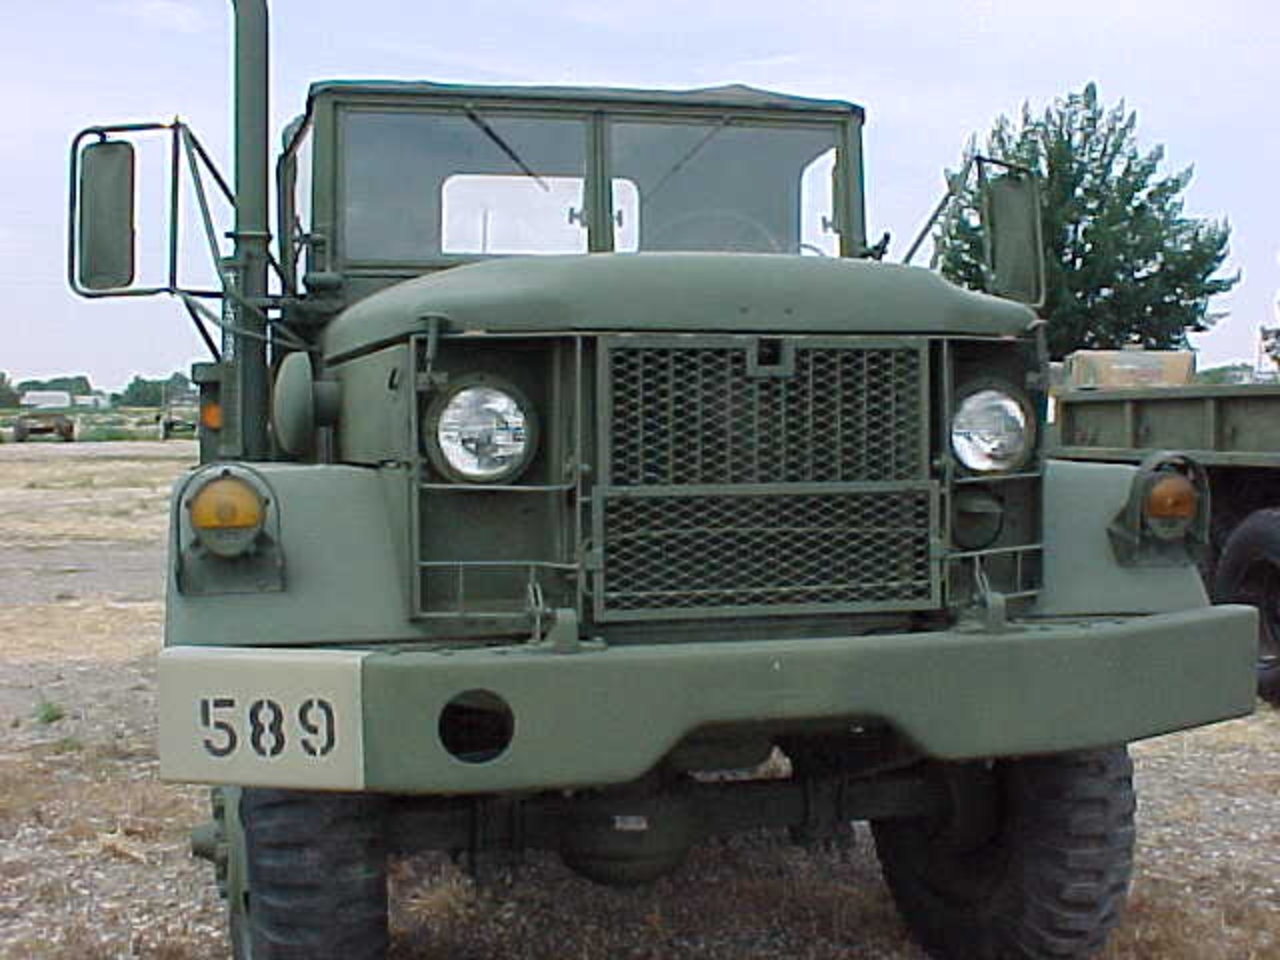 1972 AM General M35A2 6x6 - Hummer Forums by Elcova